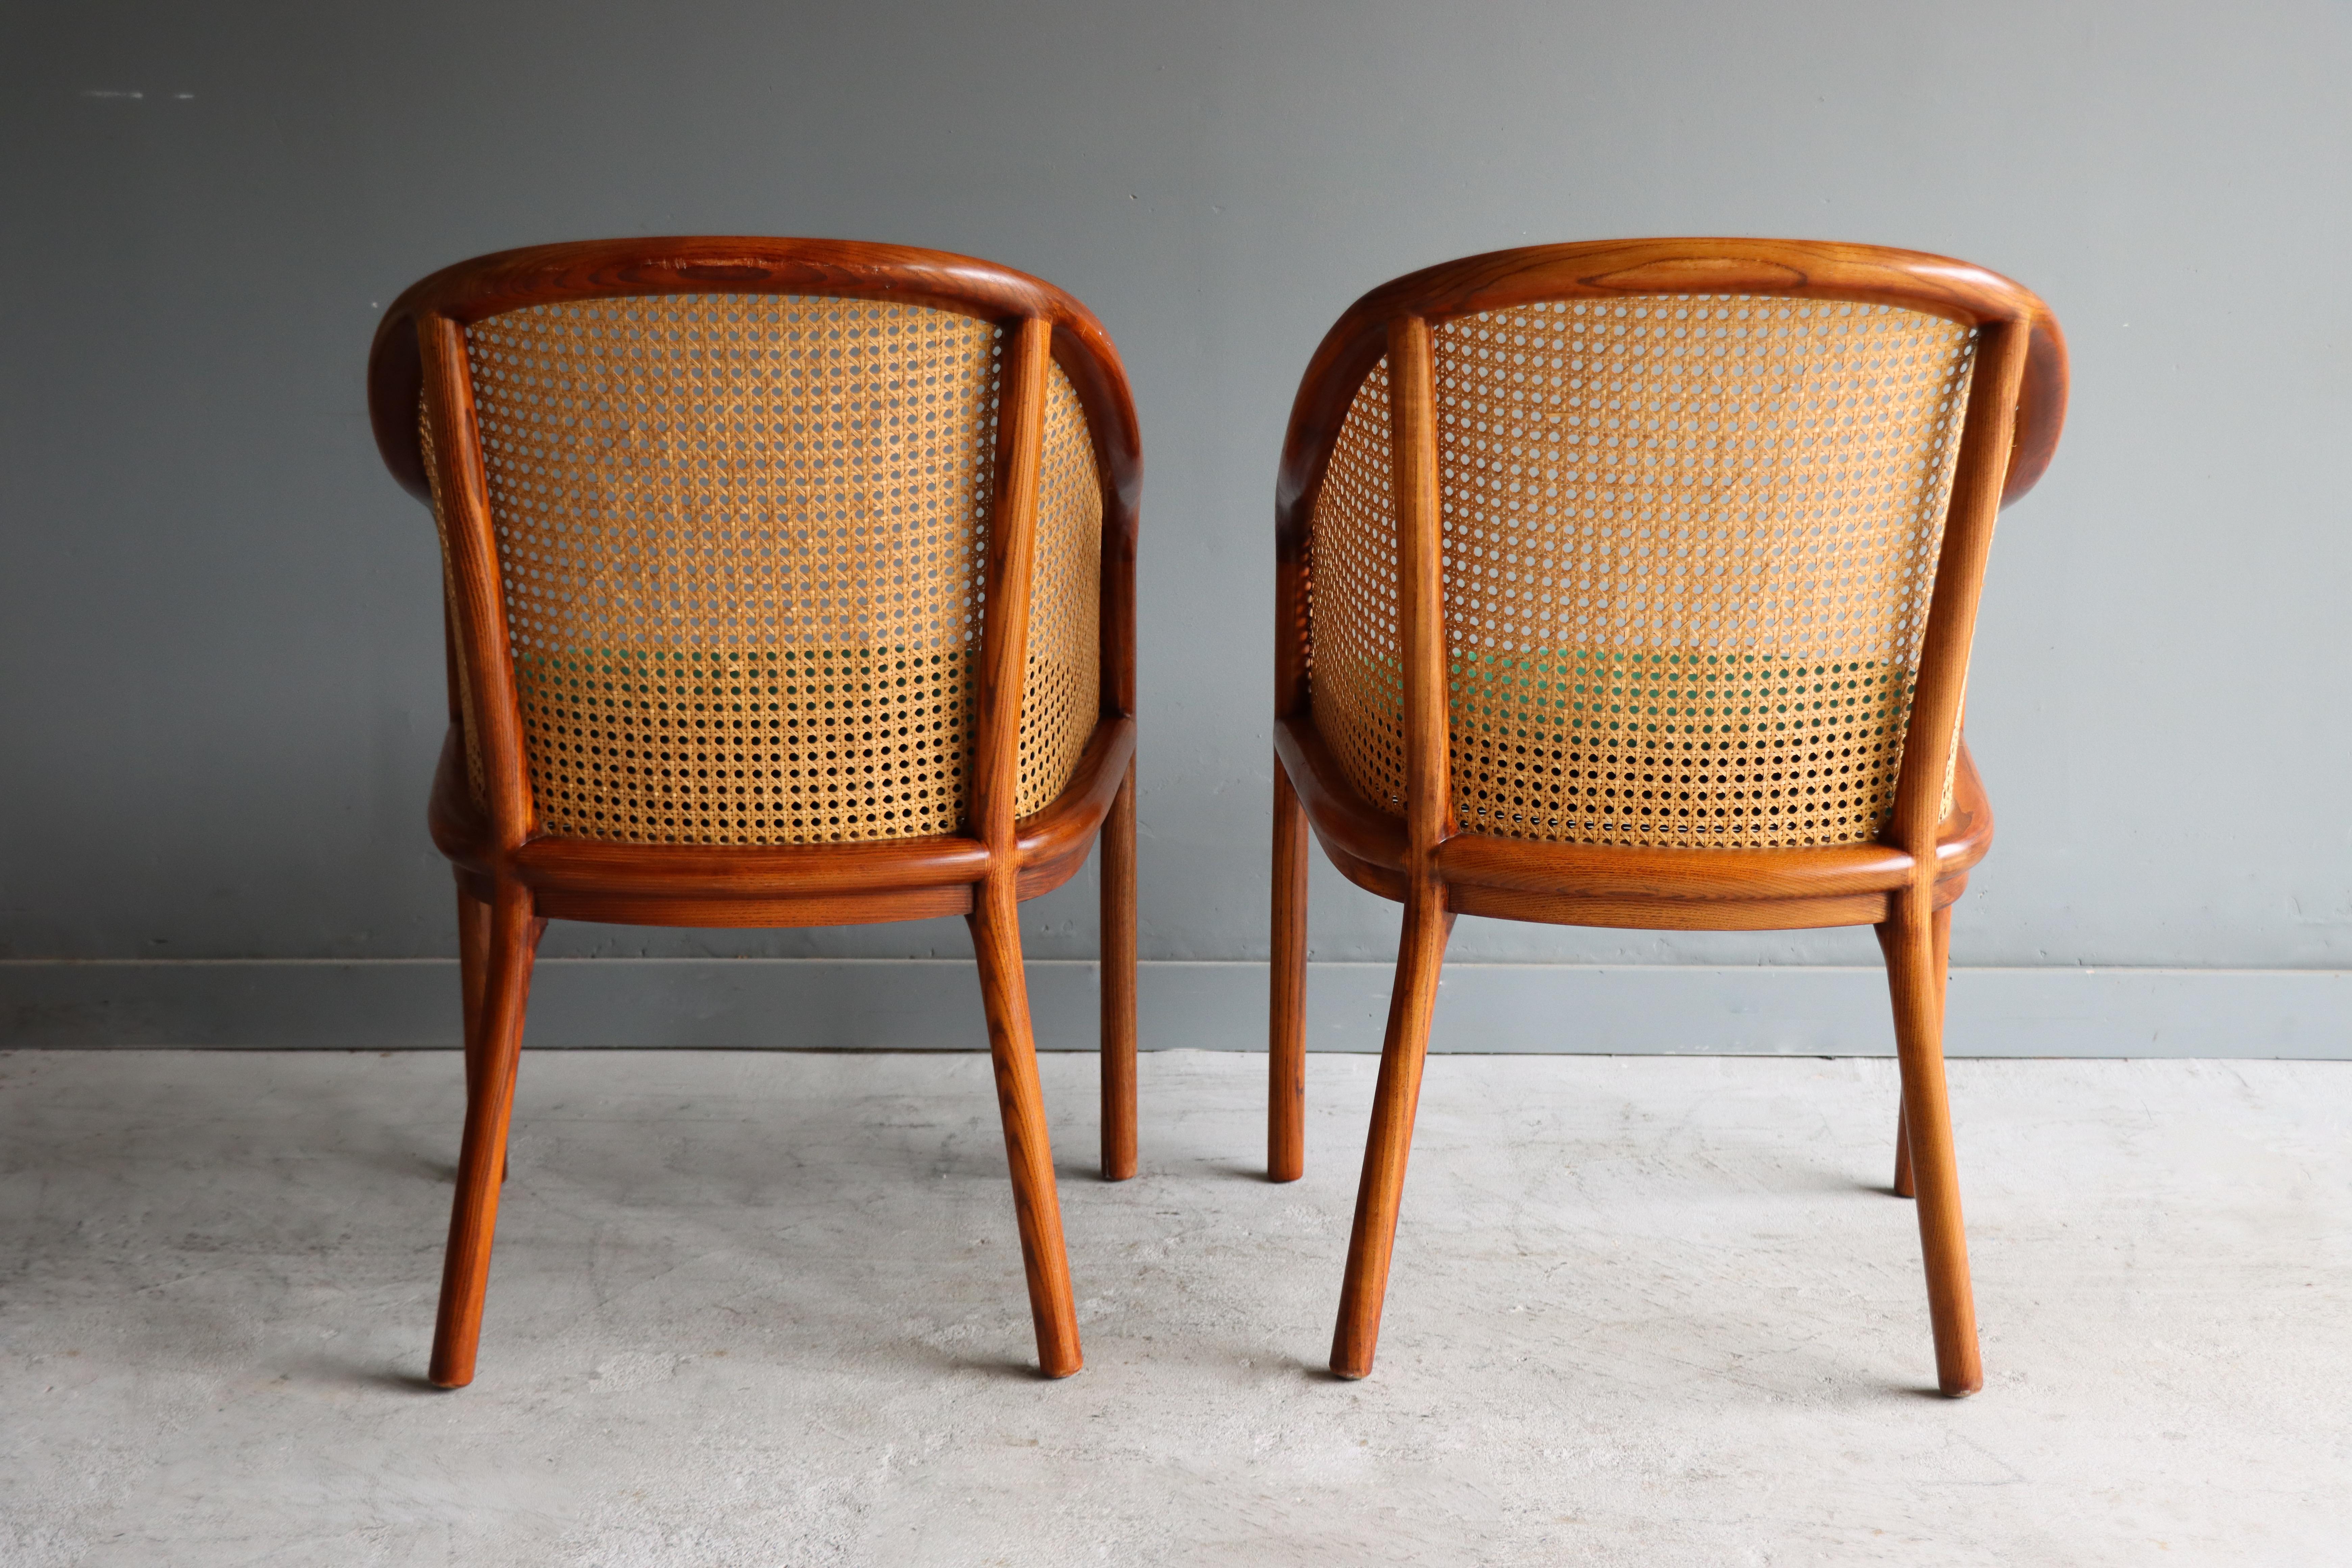 Vintage Pair of ‘Landmark’ Cane Chairs by Ward Bennett for Brickel, 1970, Mohair For Sale 1